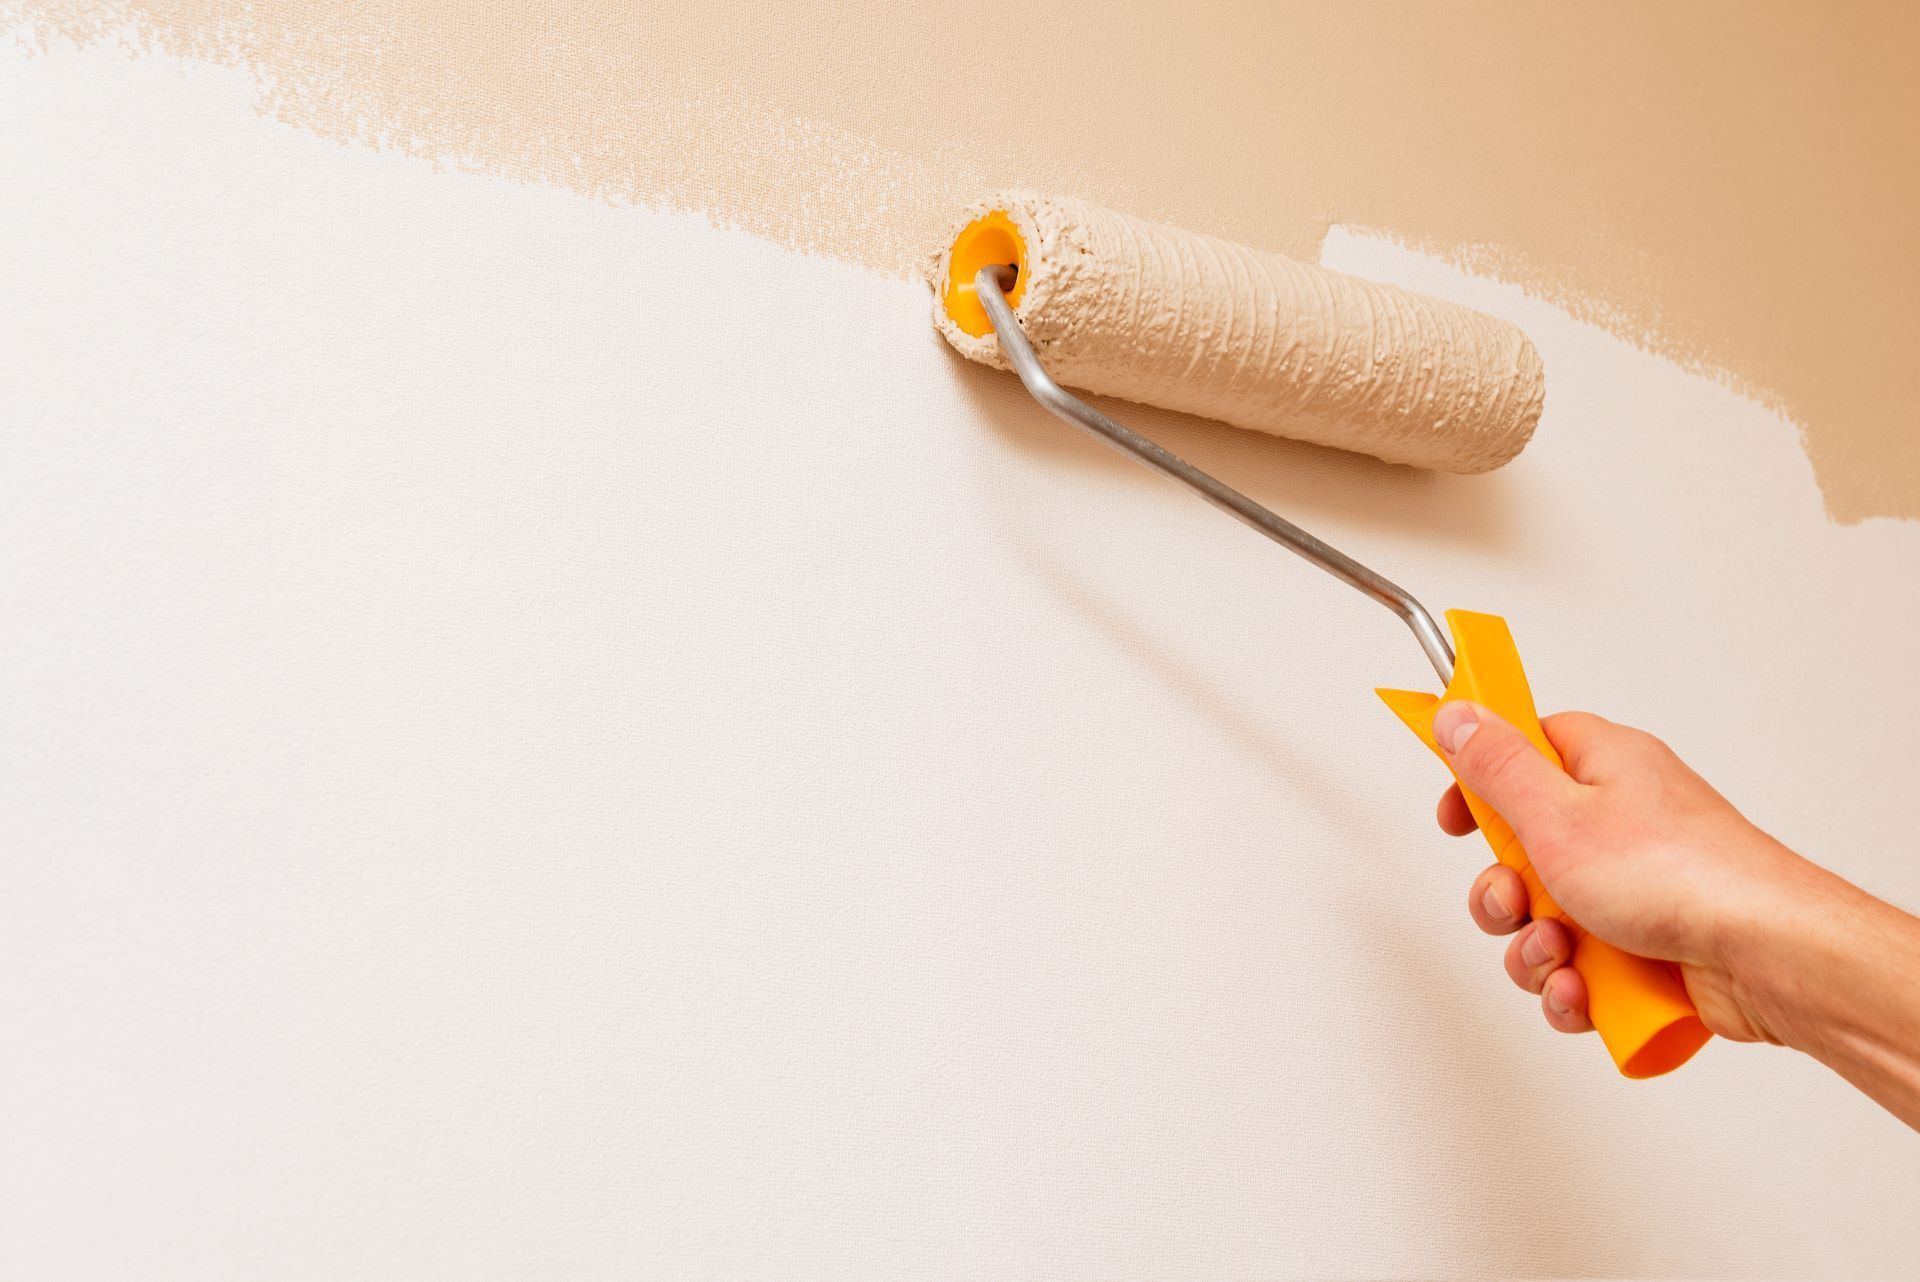 Can You Use Ceiling Paint on Walls? Consider Other Paint Options